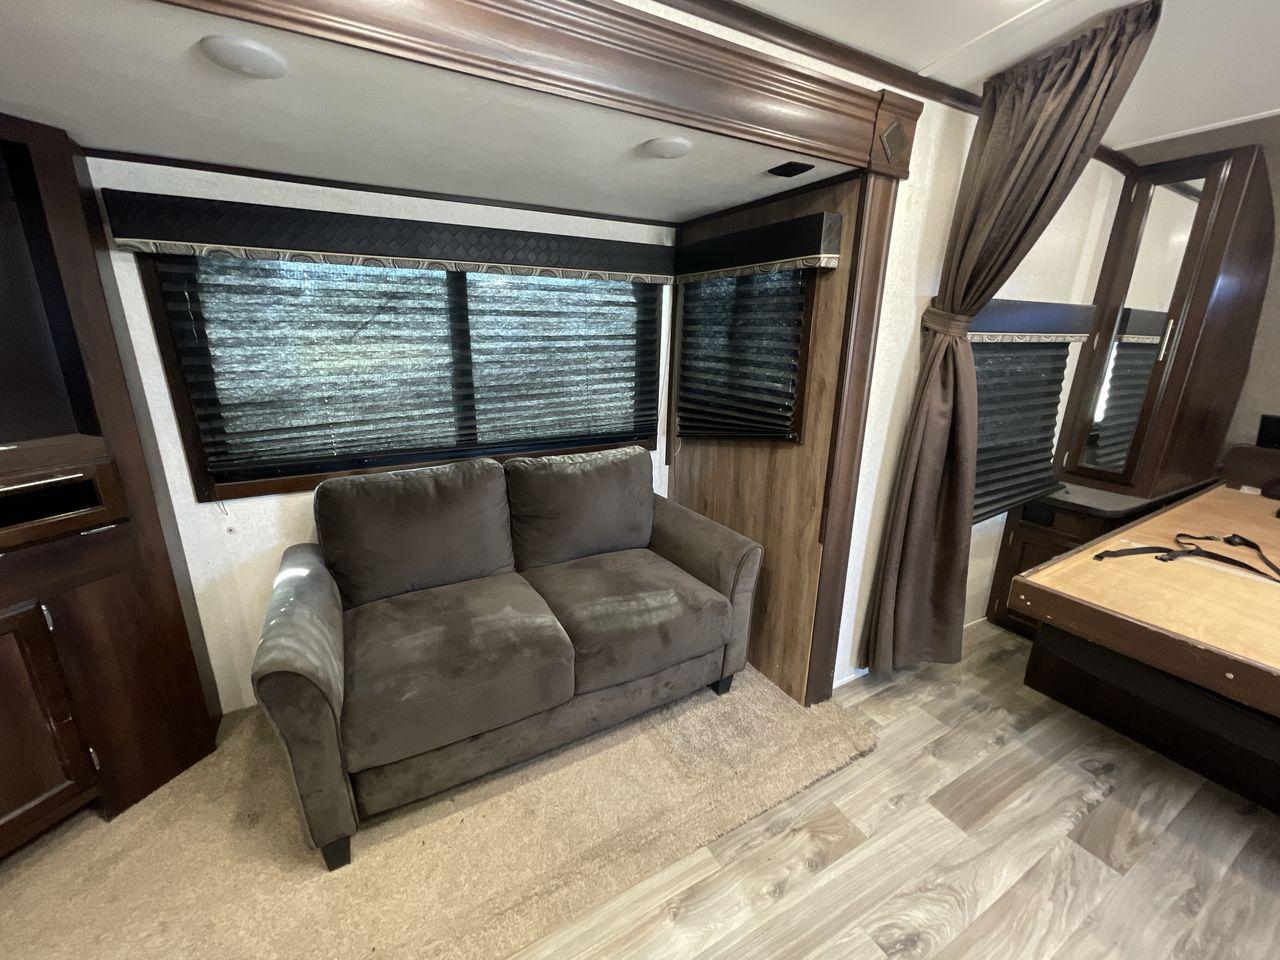 2018 WHITE JAYCO JAY FLIGHT 23MRB (1UJBJ0BN5J1) , Length: 28.17 ft | Dry Weight: 5,560 lbs. | Gross Weight: 7,250 lbs. | Slides: 1 transmission, located at 4319 N Main St, Cleburne, TX, 76033, (817) 678-5133, 32.385960, -97.391212 - The 2018 Jayco Jay Flight 23MRB is a travel trailer that encapsulates both compactness and luxury for unparalleled camping experiences. Spanning 28 feet in length, this model boasts a thoughtfully arranged interior featuring a single slide-out, seamlessly amplifying the living space. The Jay Flight - Photo #11